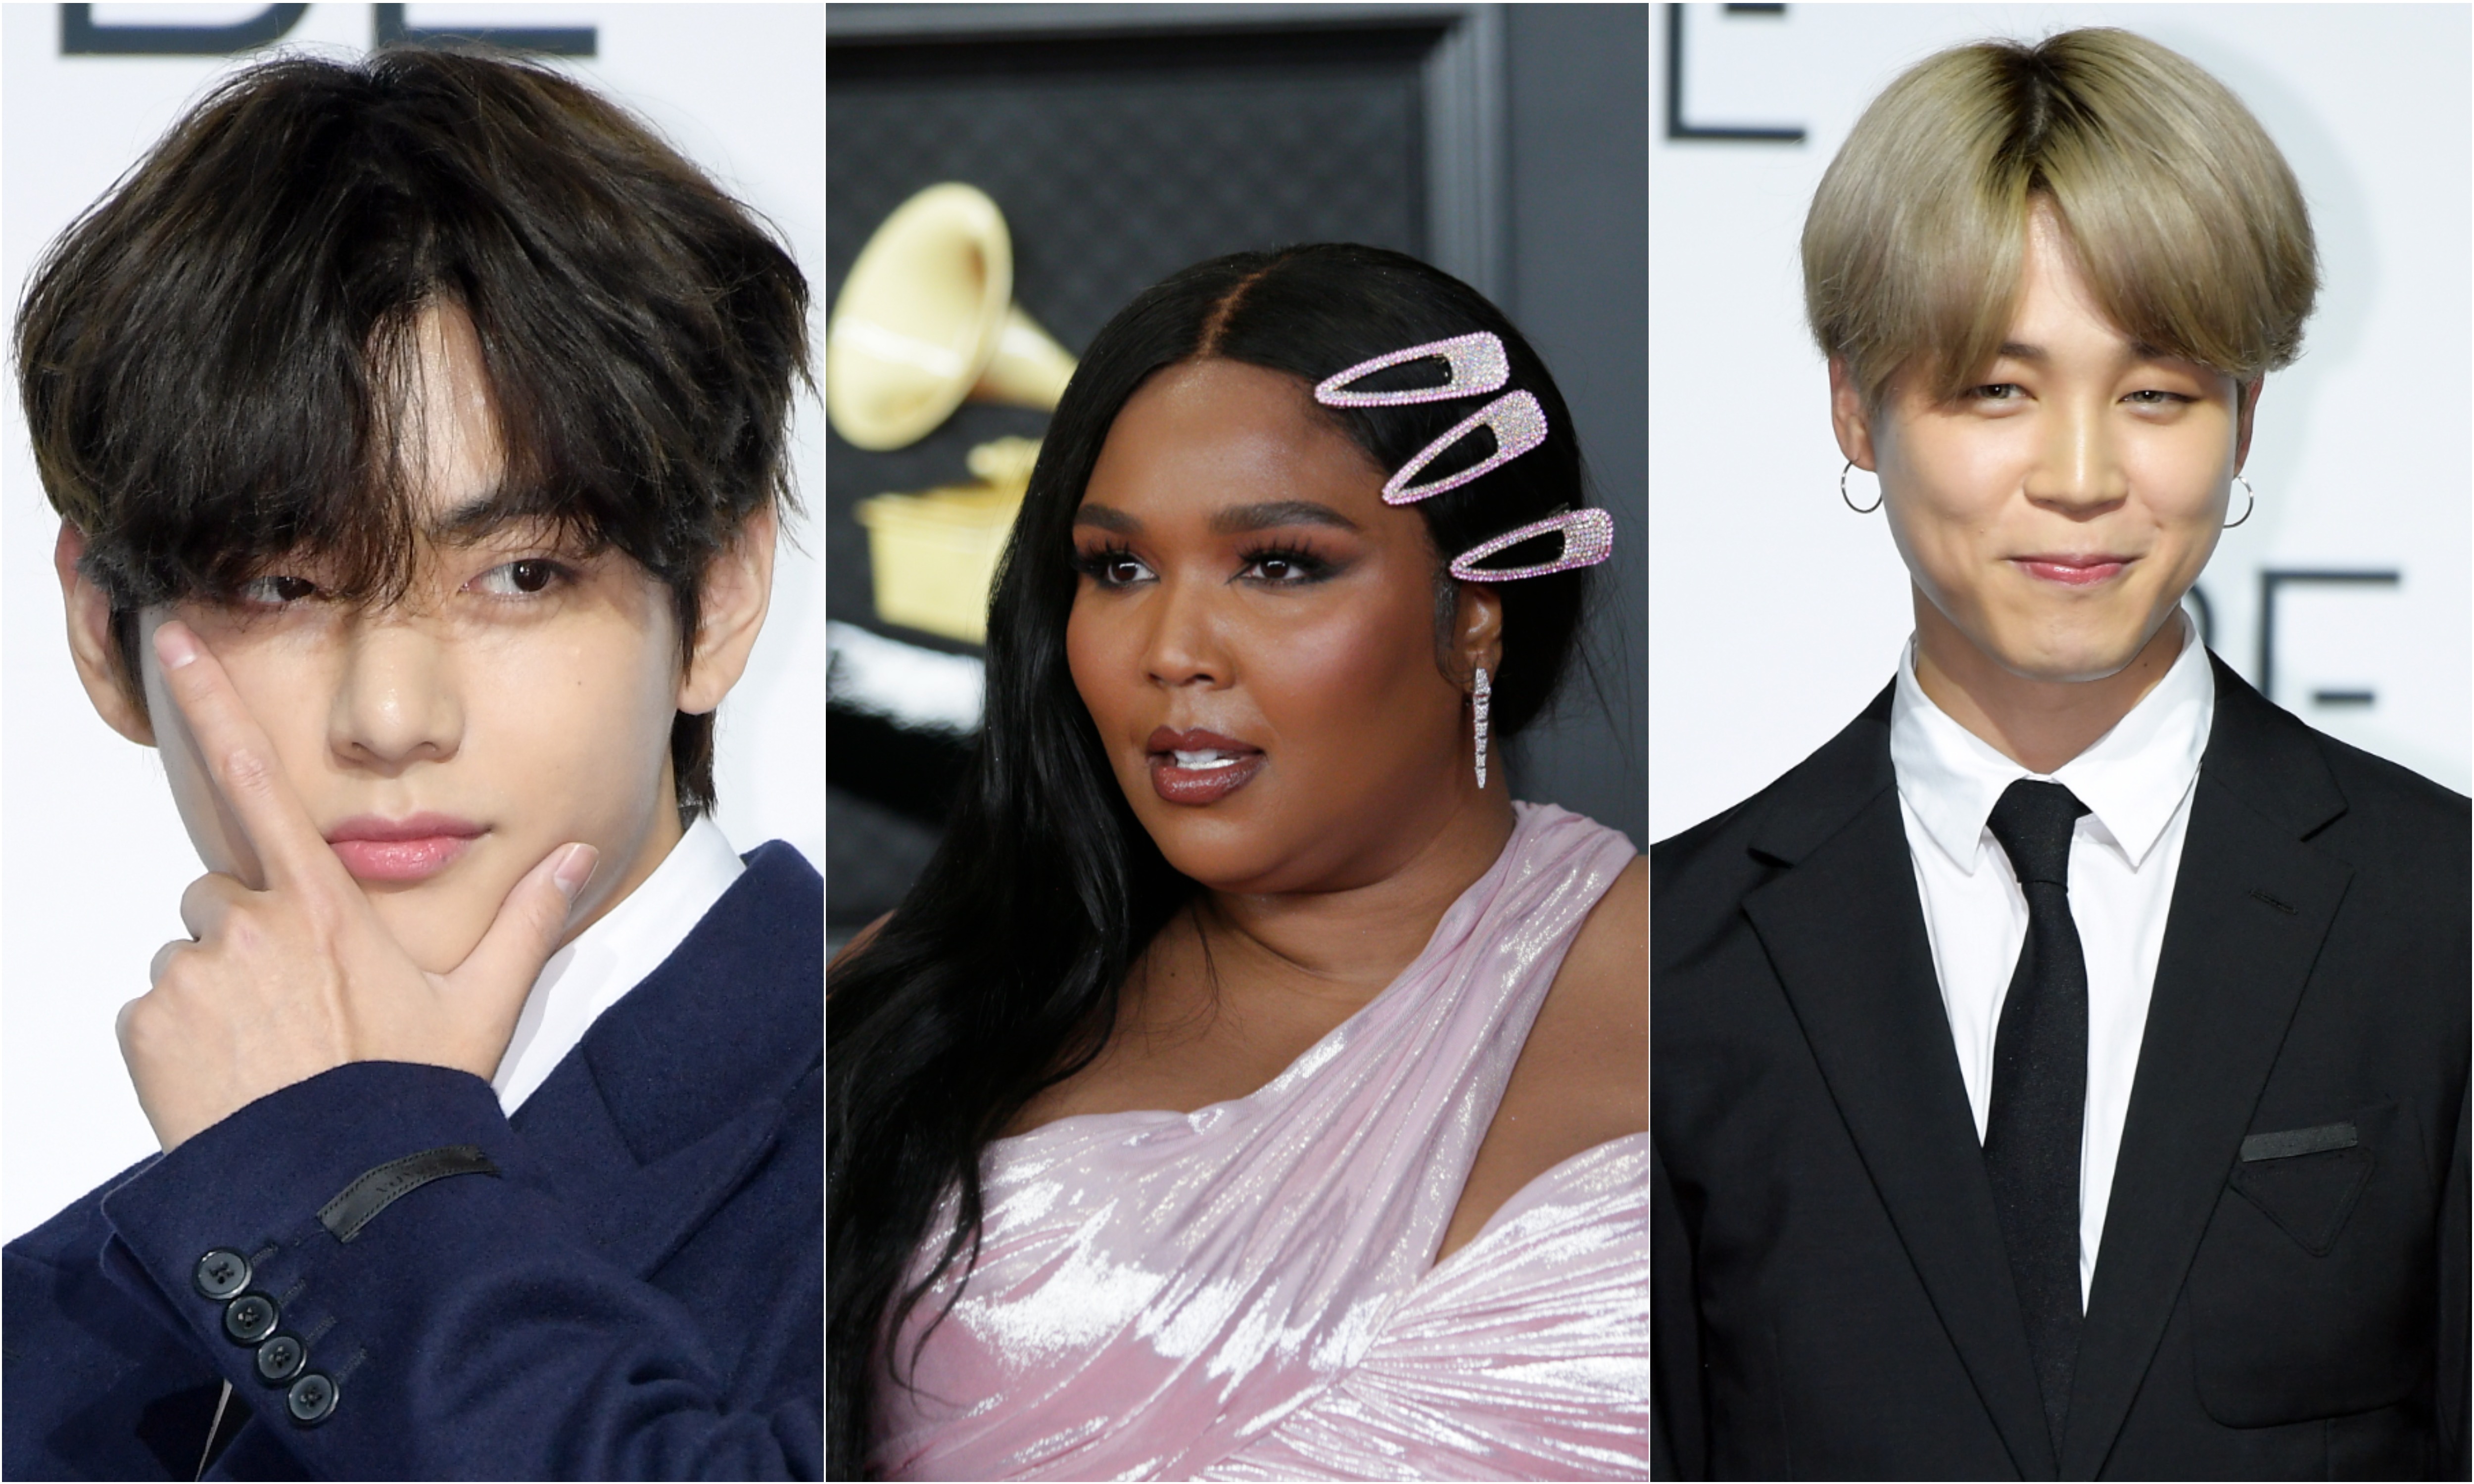 A joined photo of V of BTS, Lizzo, and Jimin of BTS